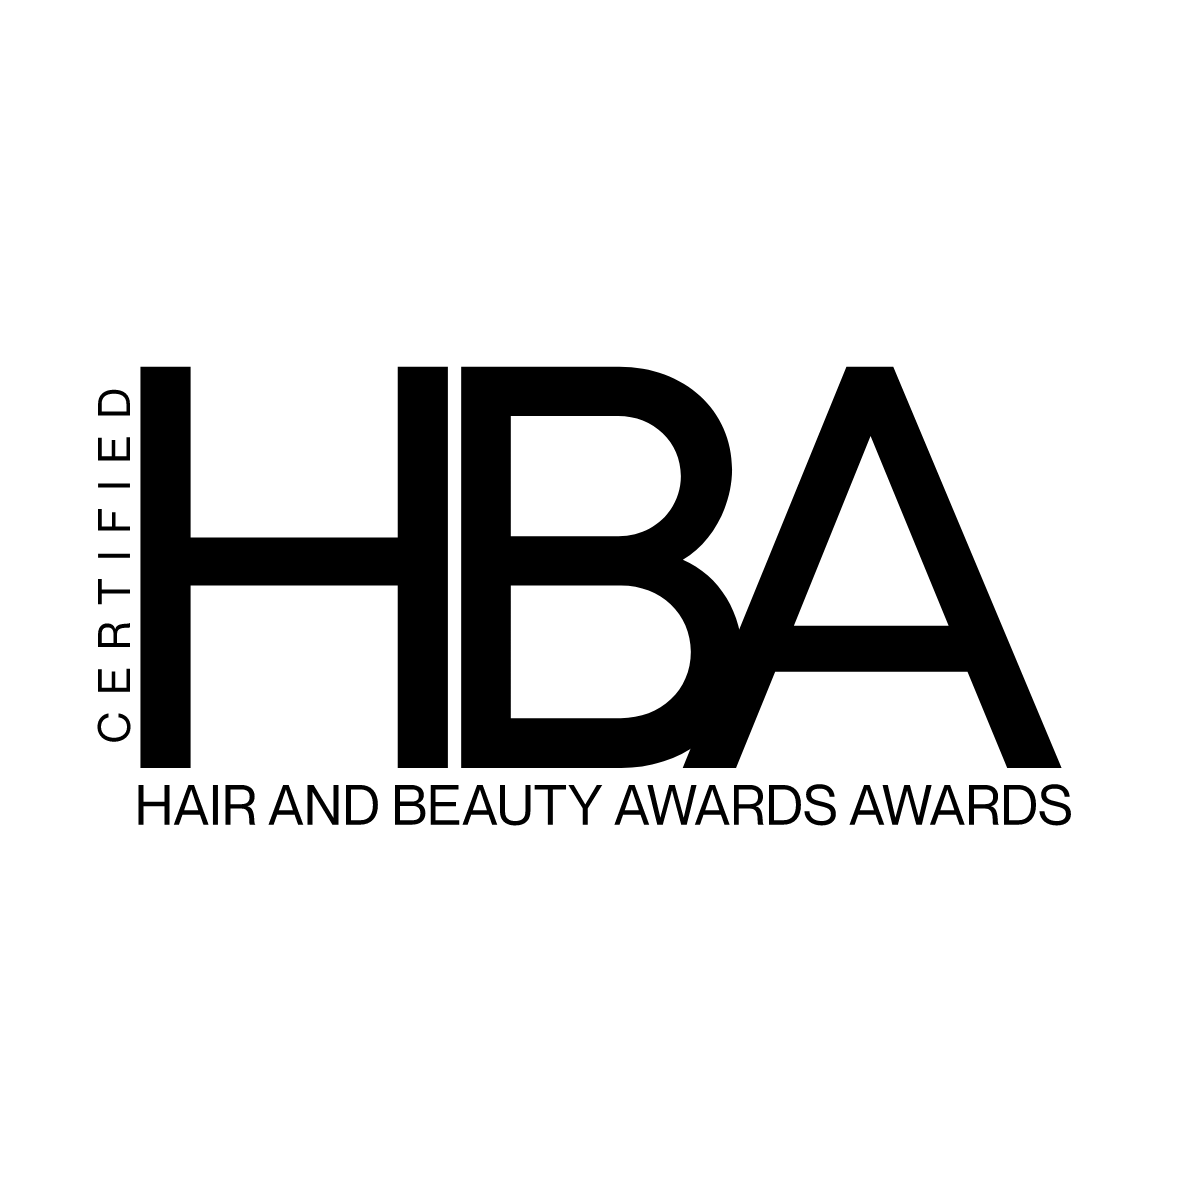 The Official UK Hair and Beauty Awards – The UK Hair and Beauty Awards